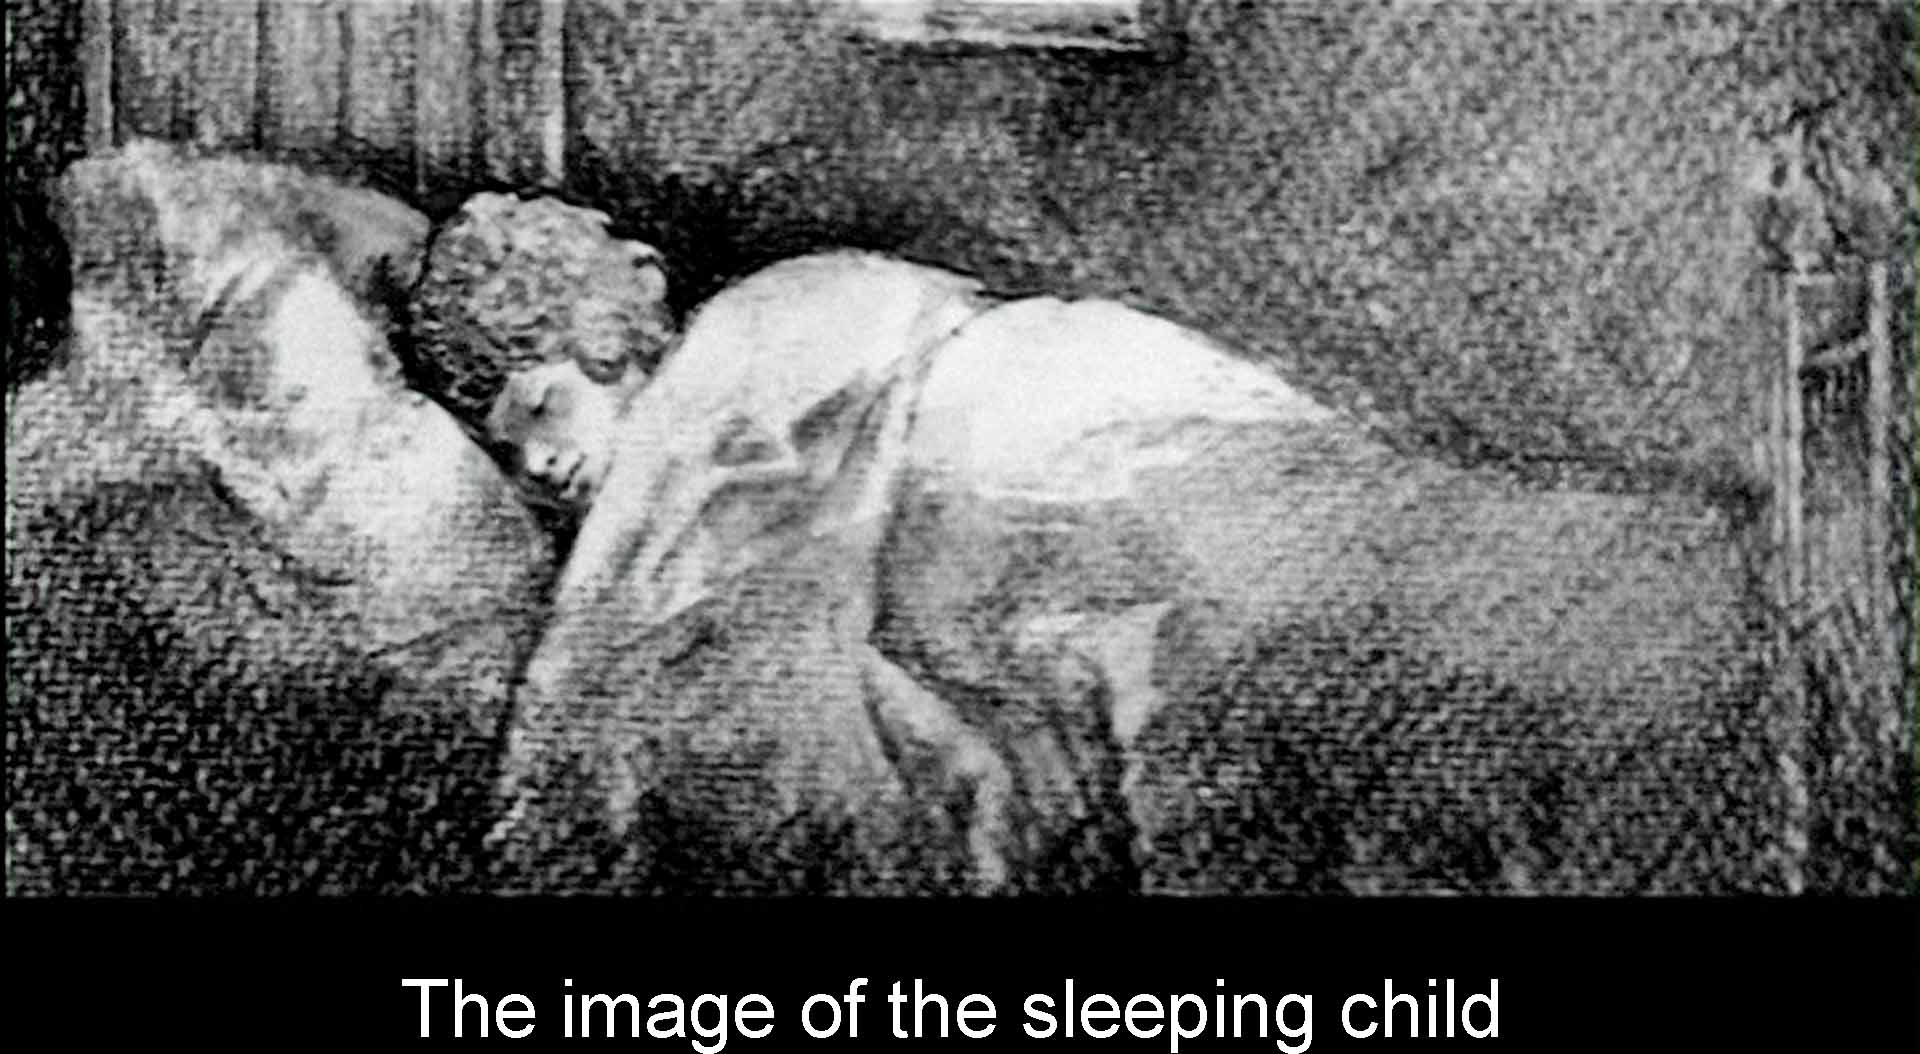 The image of the sleeping child